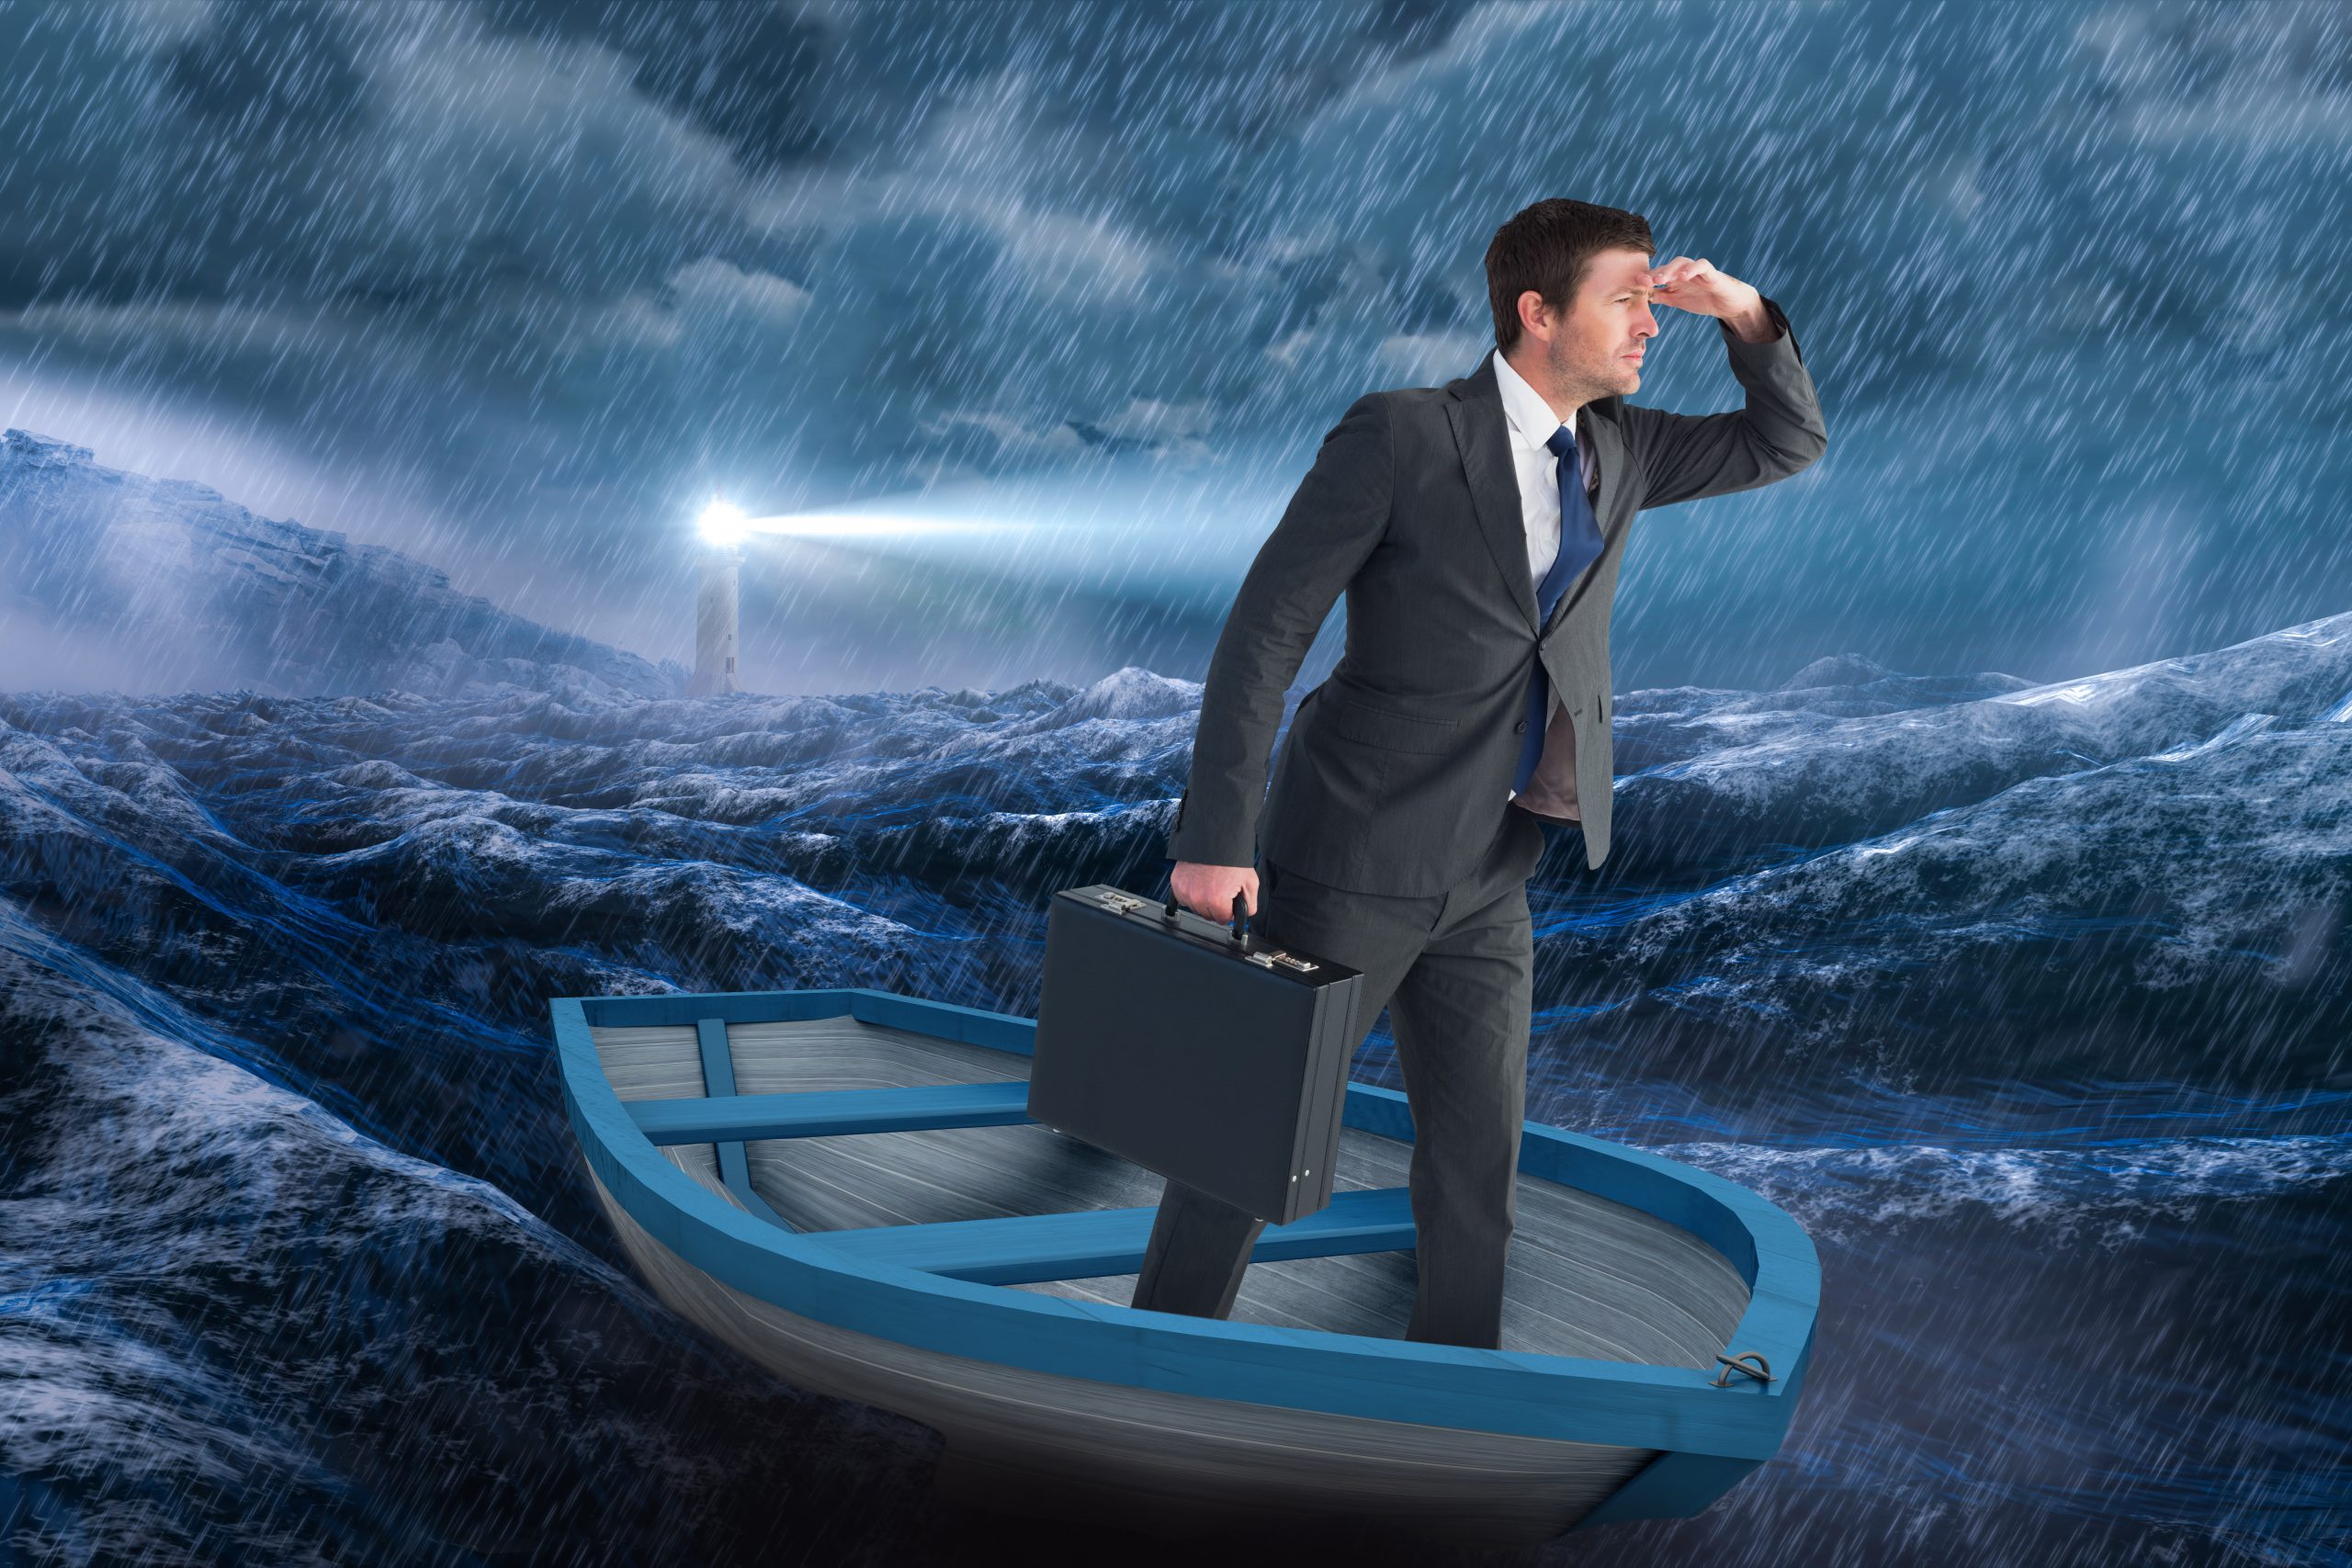 Man standing in boat on rough seas, looking for a light.